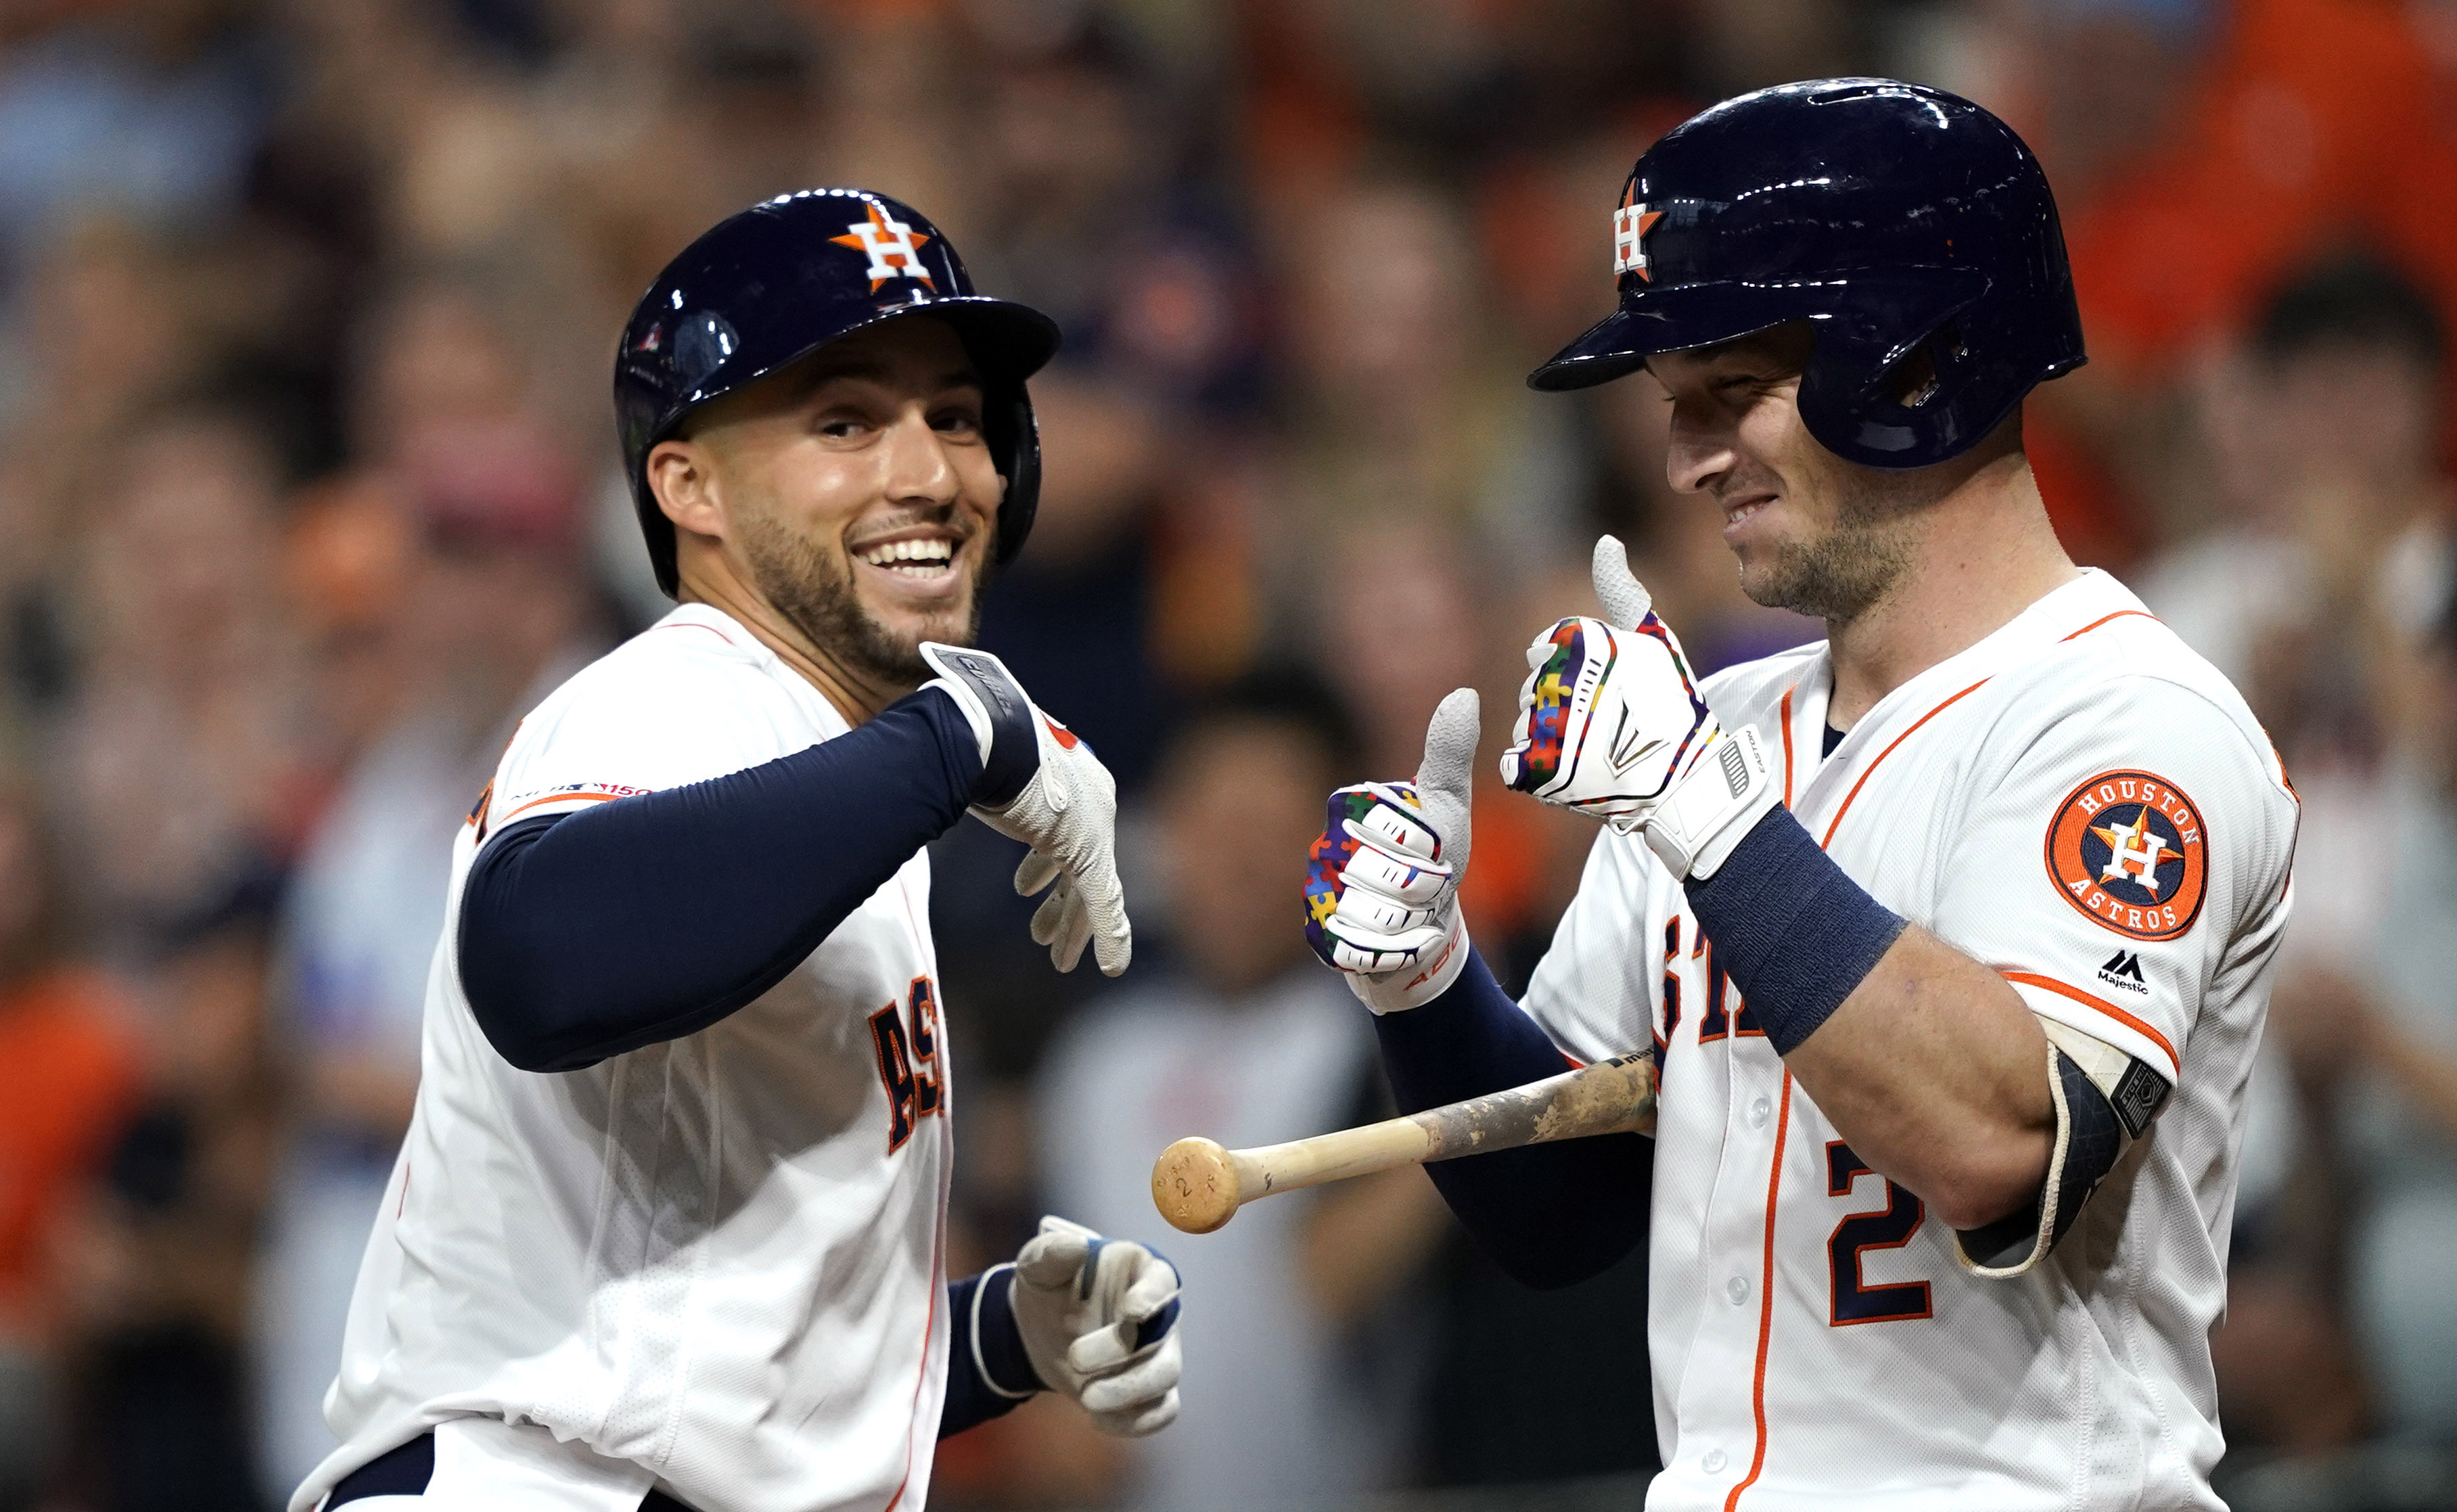 Astros lead way with 6 All-Stars; Dodgers among clubs with 4